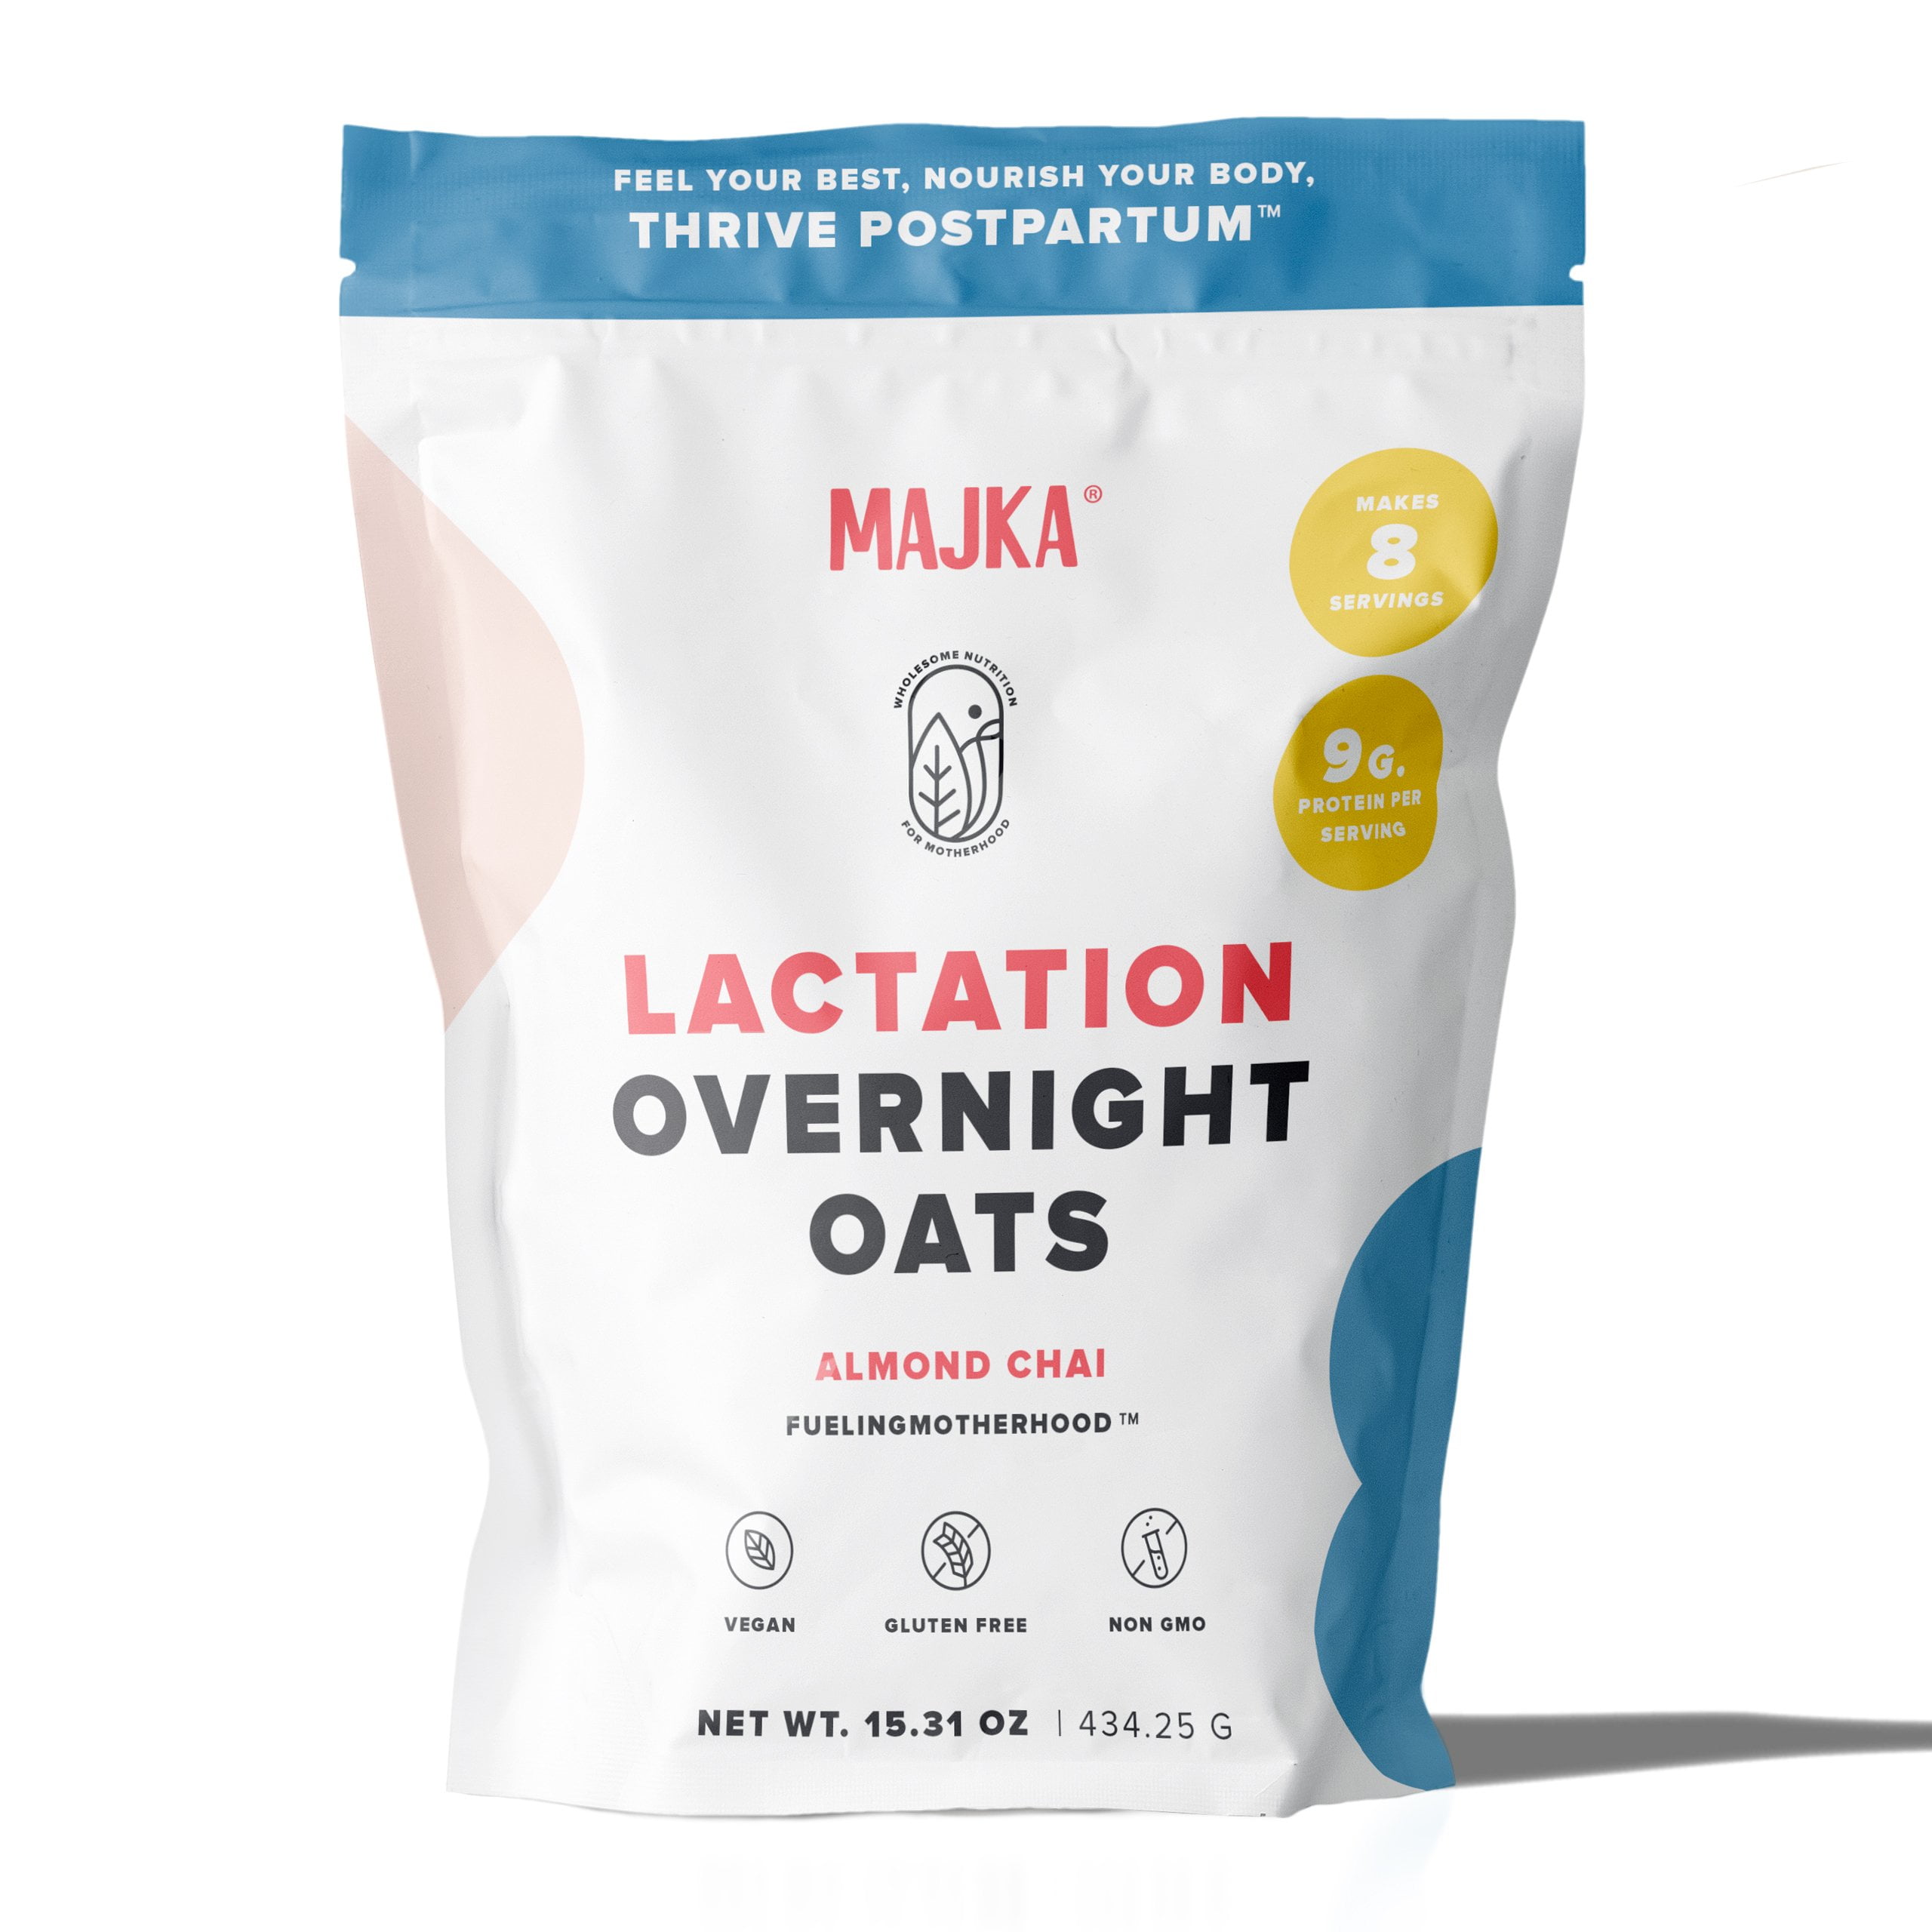 Majka Lactation Over Night Oats Supplement to Nourish and Support Your Milk Supply Gluten Free and Vegan Almond Chai Flavor 8 Servings